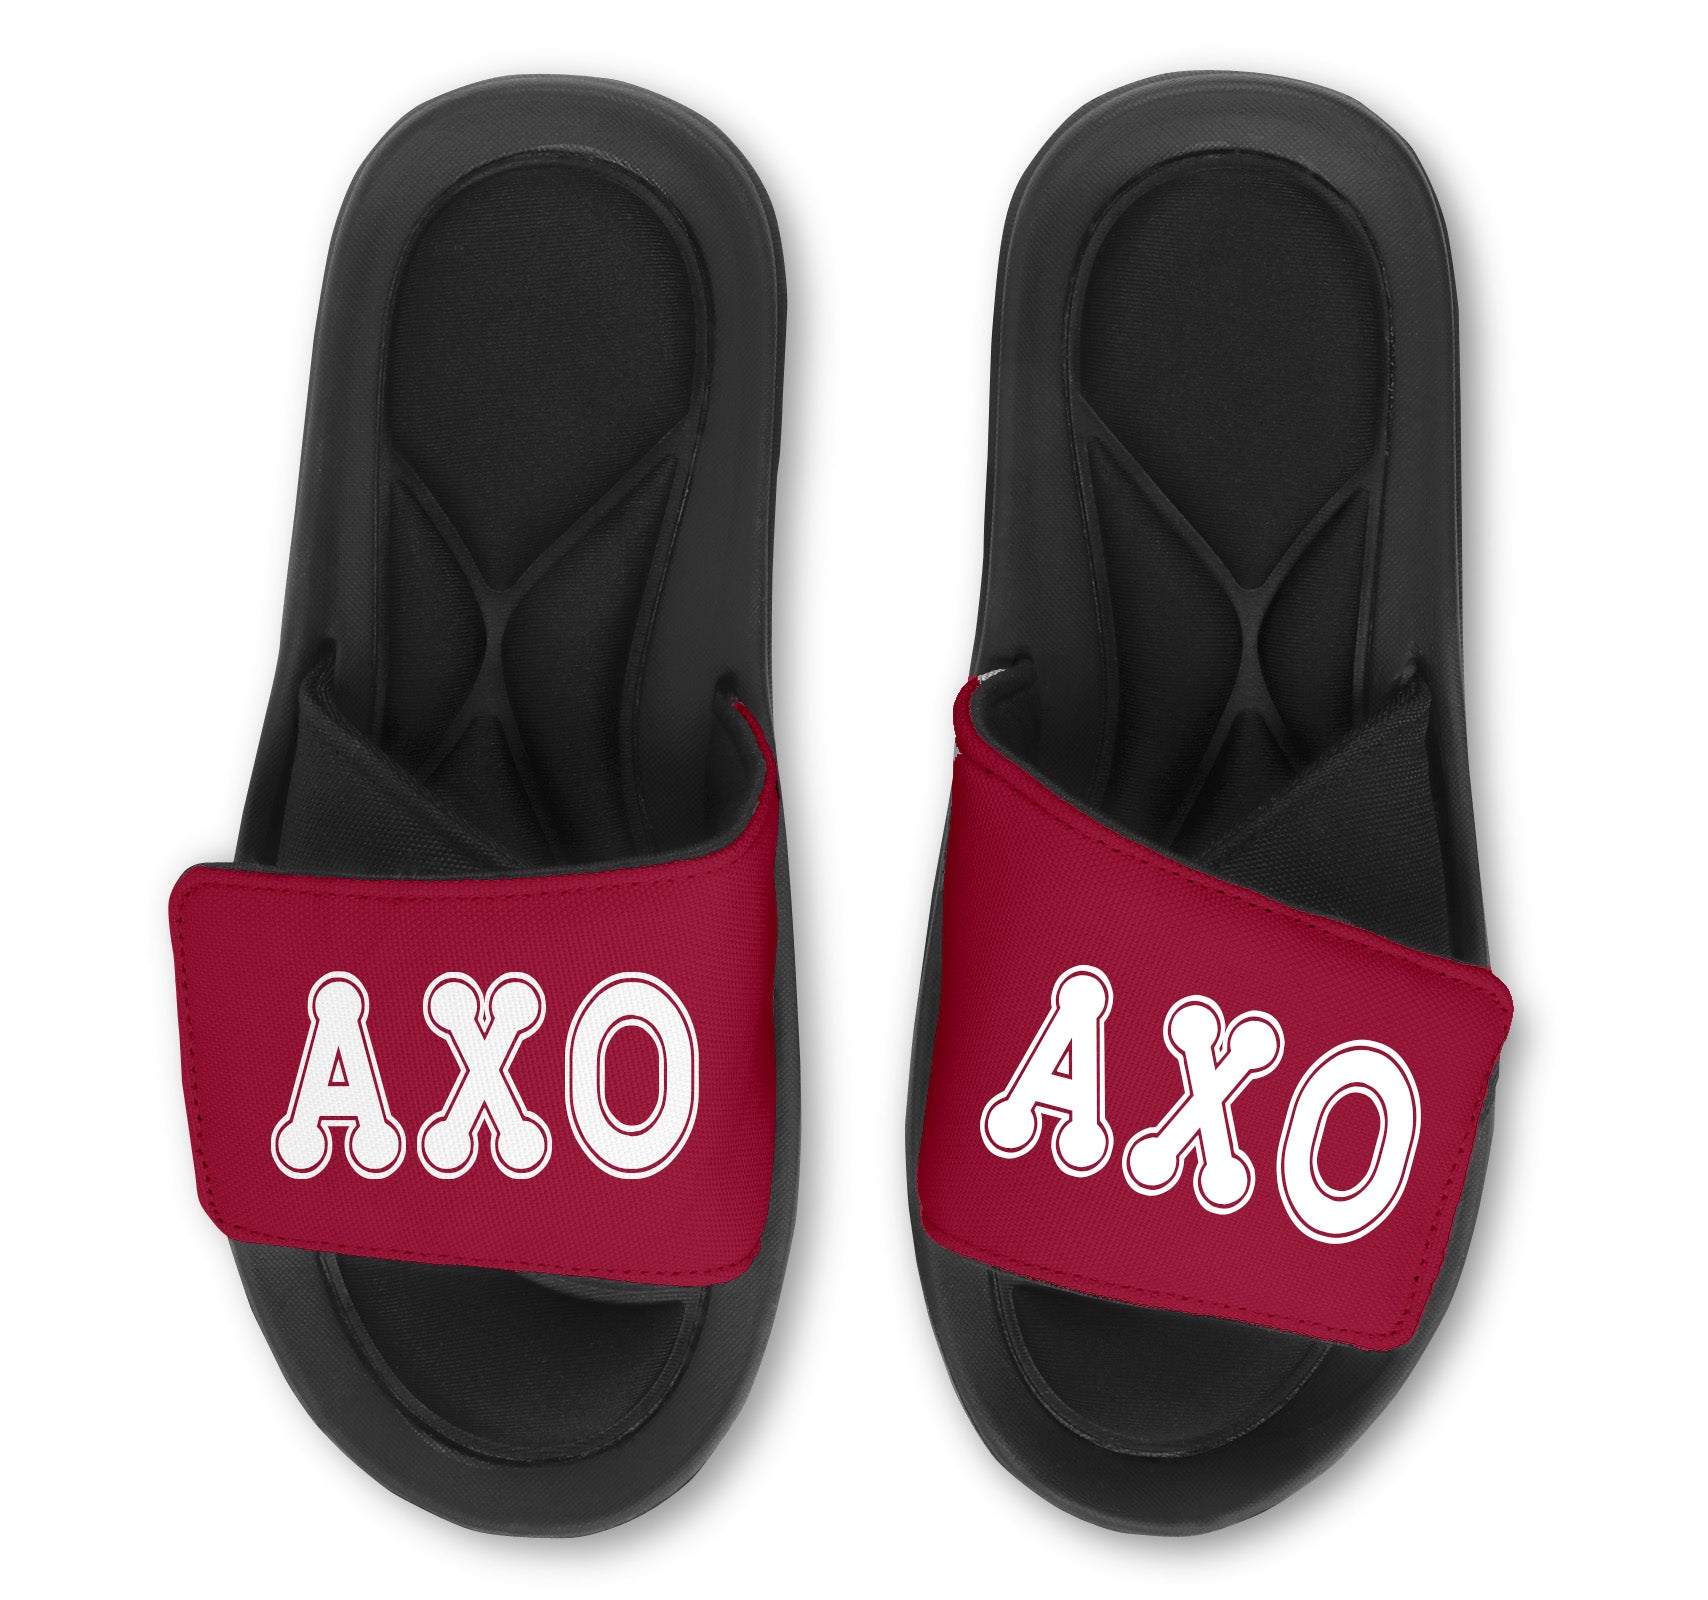 Alpha Chi Omega Slides - Customize with Your Name